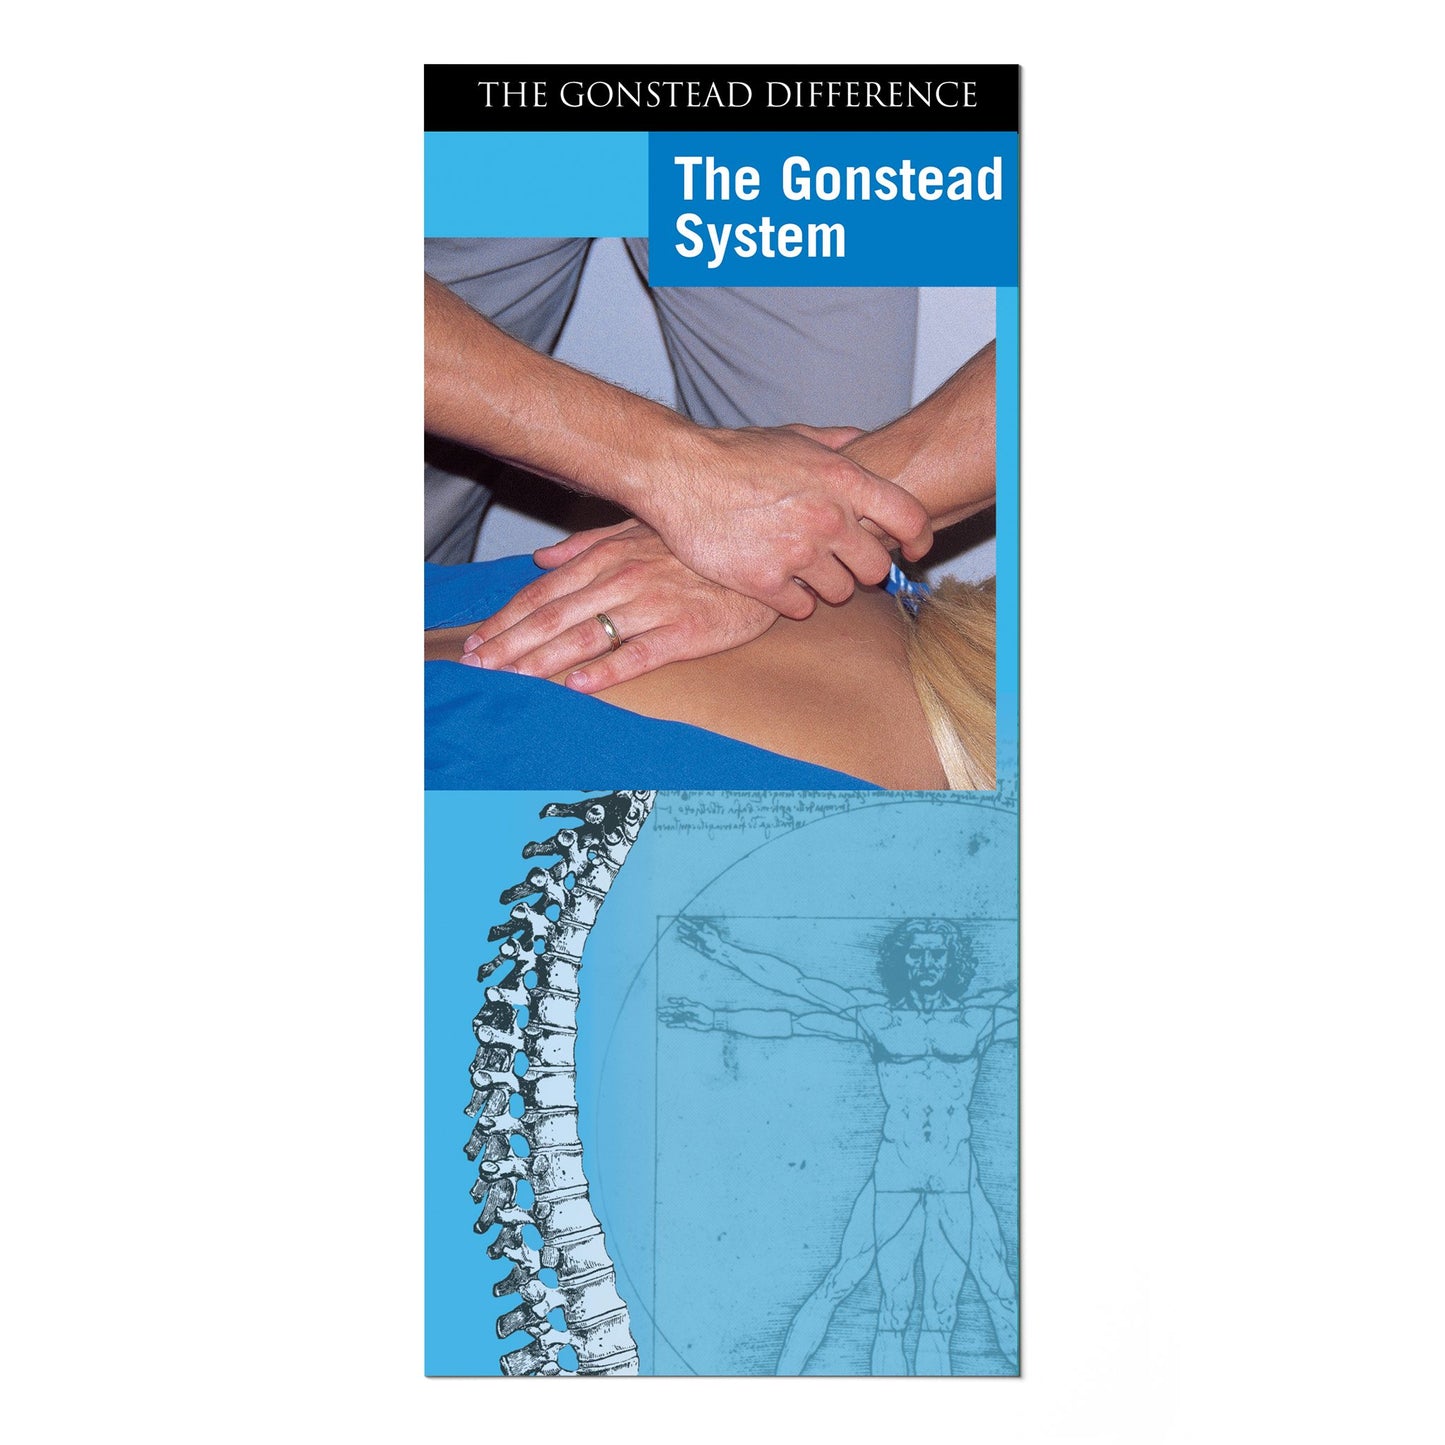 The Gonstead System